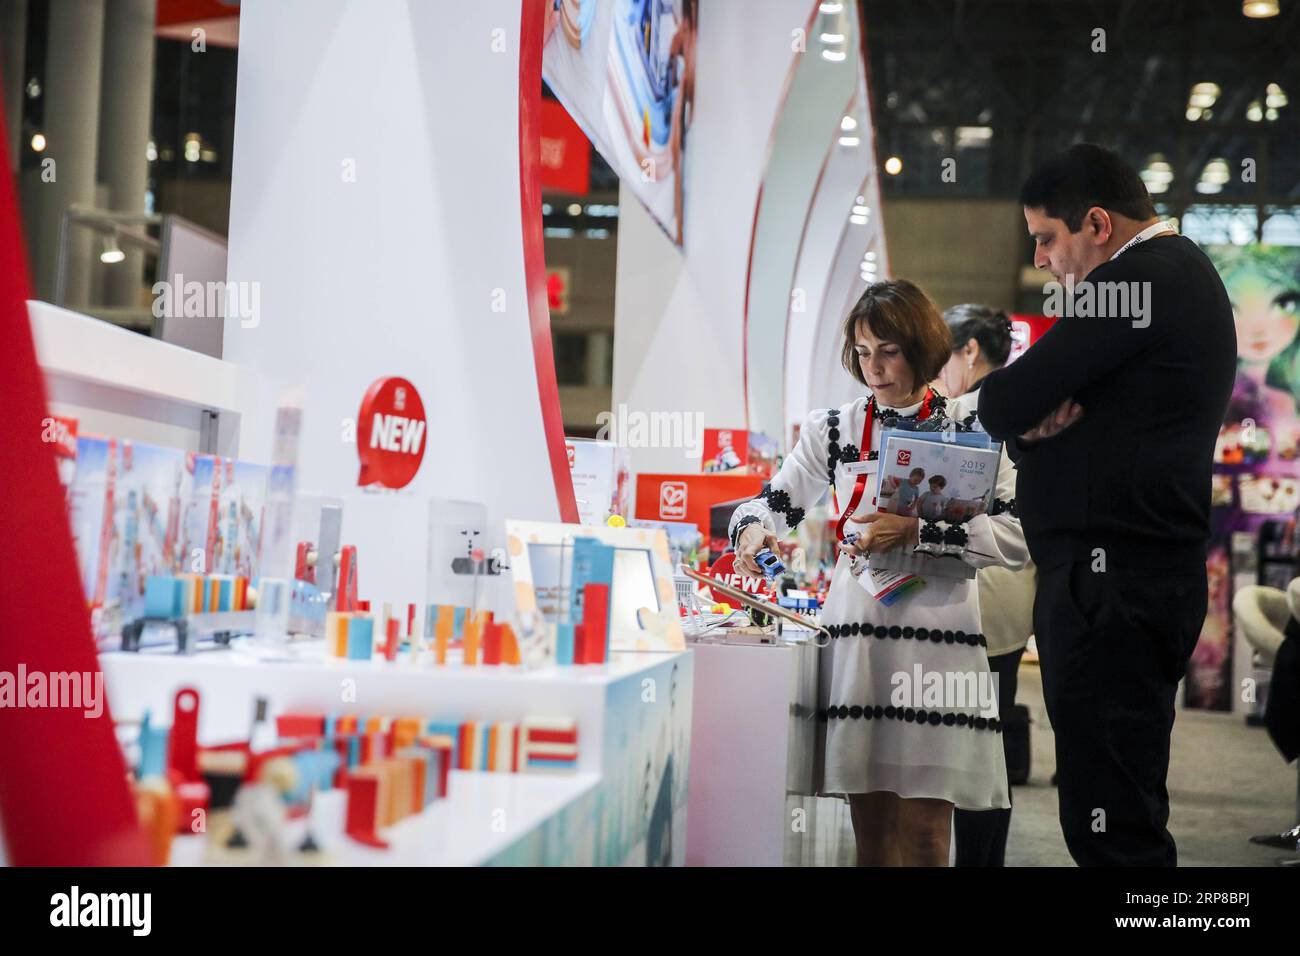 (190226) -- BEIJING, Feb. 26, 2019 -- Visitors look at toy products at the booth of Hape Toys during the 116th Annual North American International Toy Fair at the Jacob K. Javits Convention Center in New York, the United States, on Feb. 18, 2019. ) Xinhua headlines: More fun toys, no painful tariffs: American toymakers hopeful on U.S.-China trade deal WangxYing PUBLICATIONxNOTxINxCHN Stock Photo